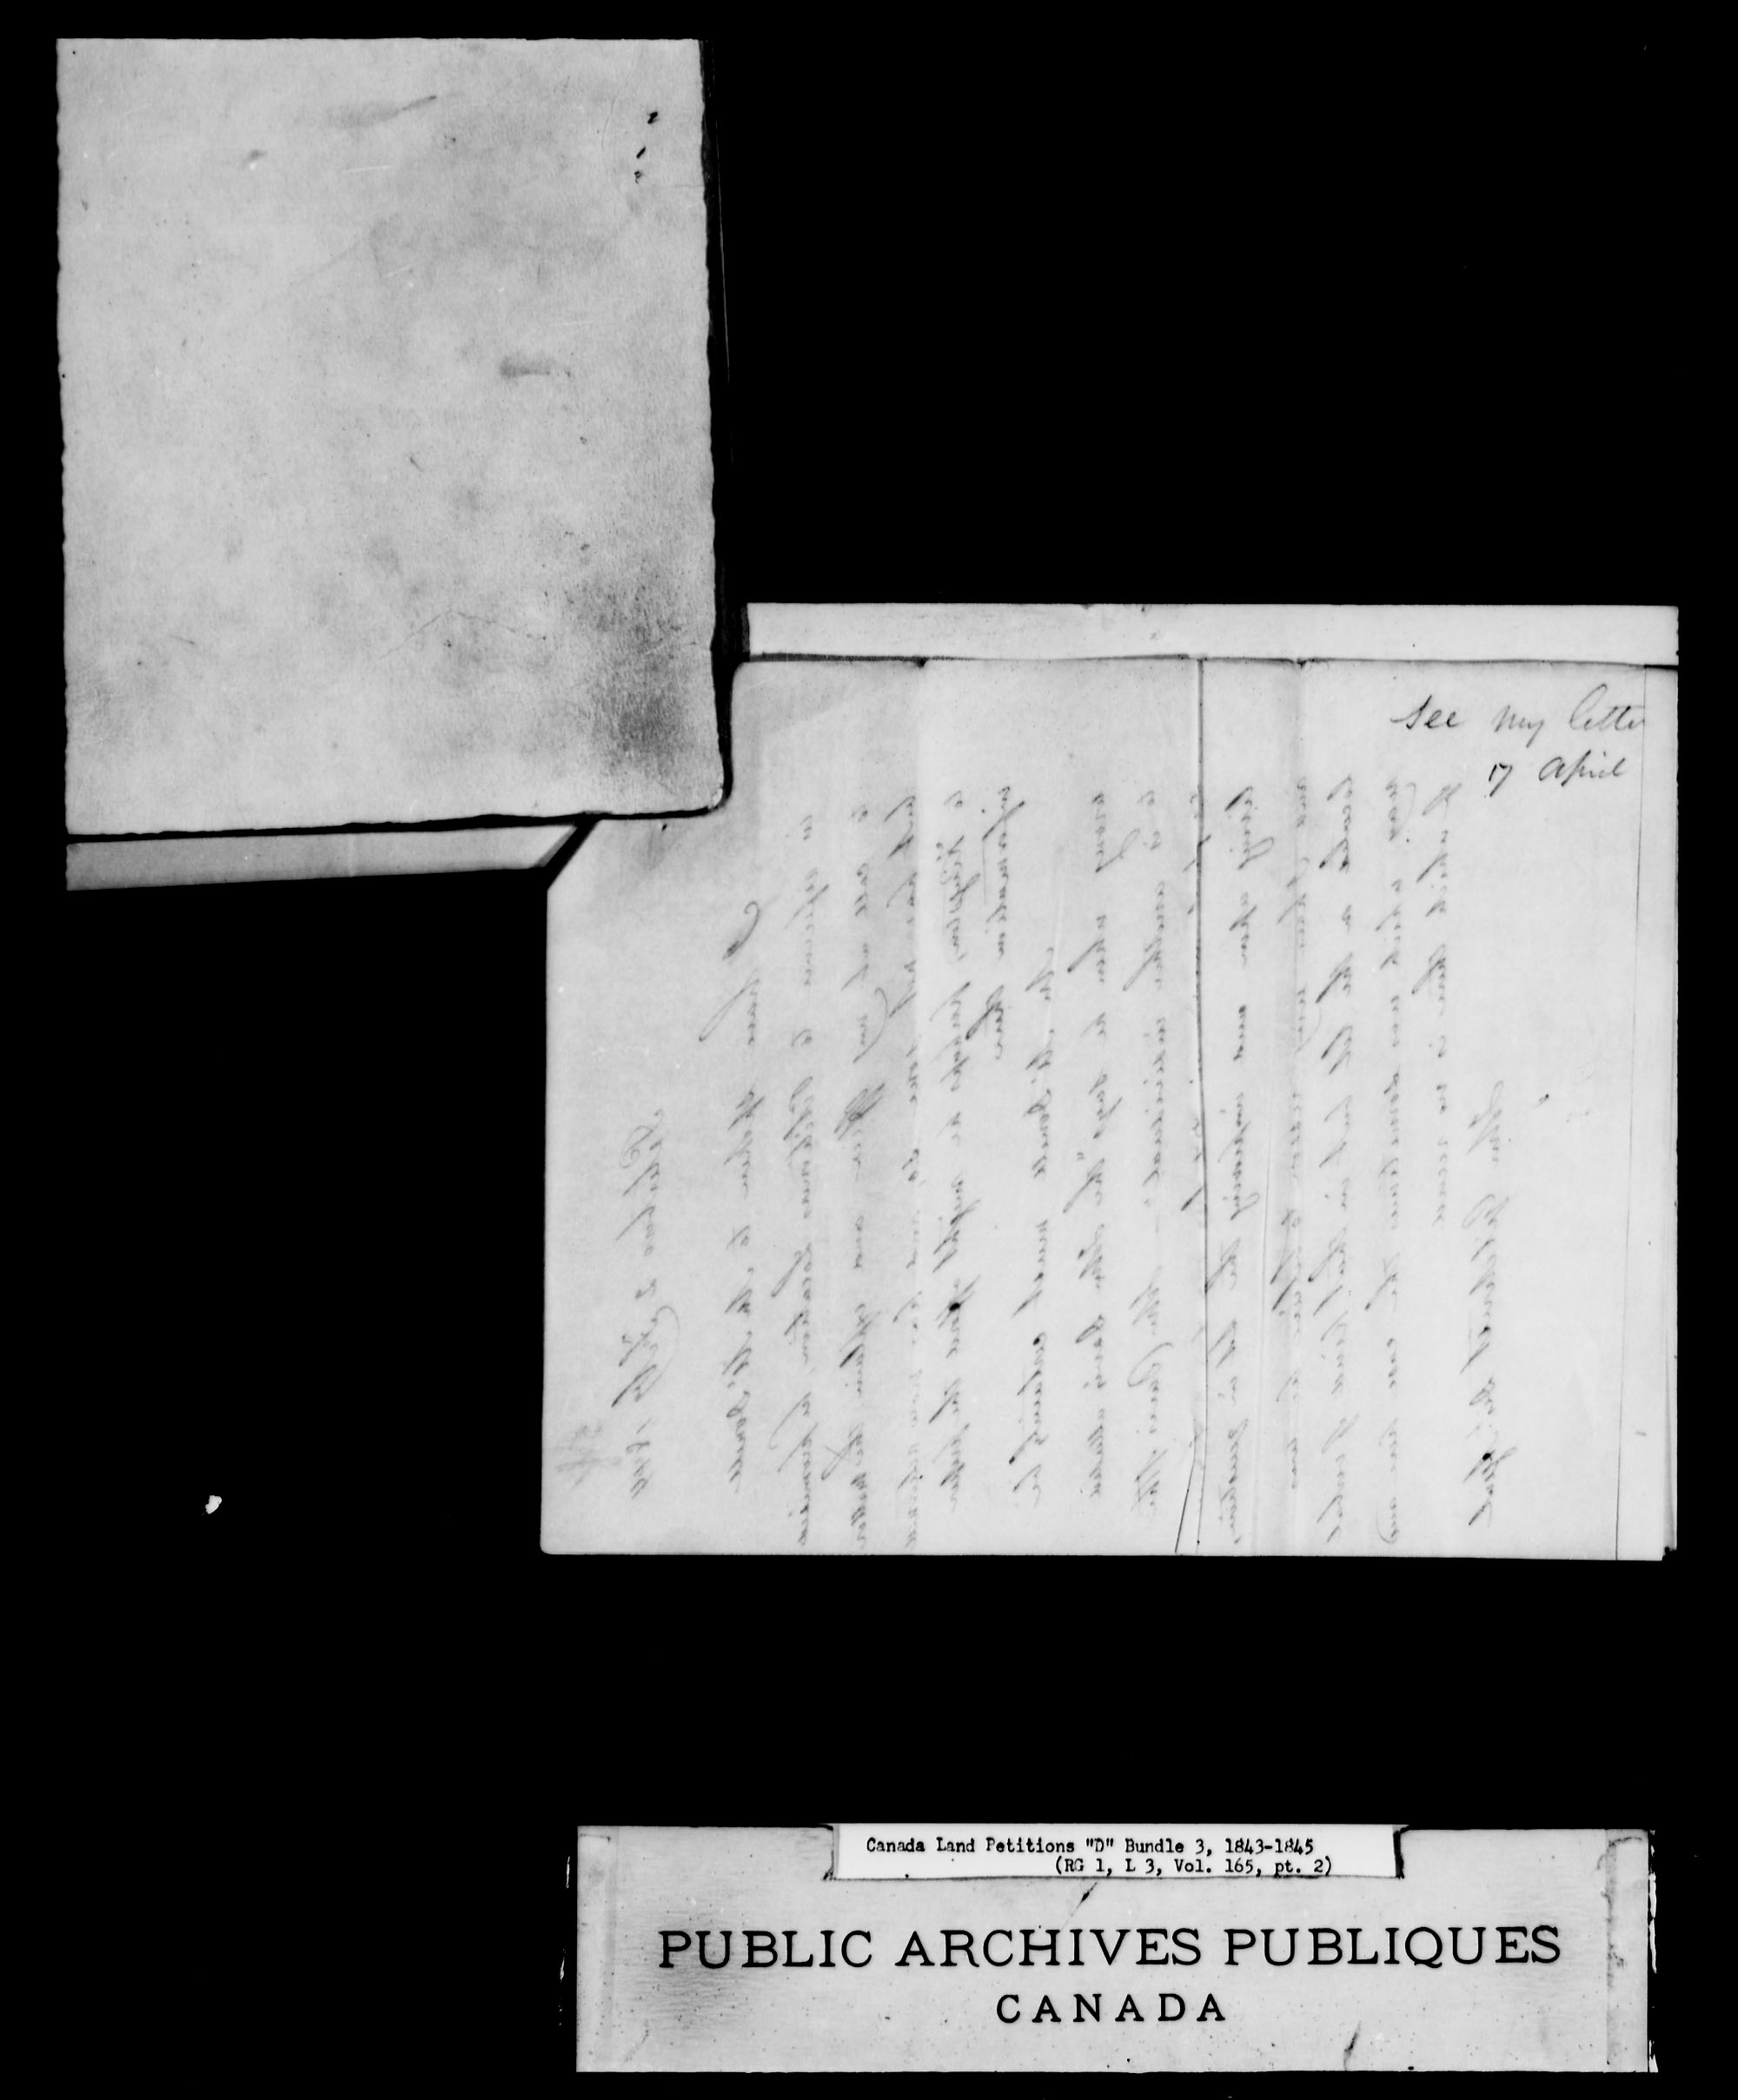 Title: Upper Canada Land Petitions (1763-1865) - Mikan Number: 205131 - Microform: c-1880